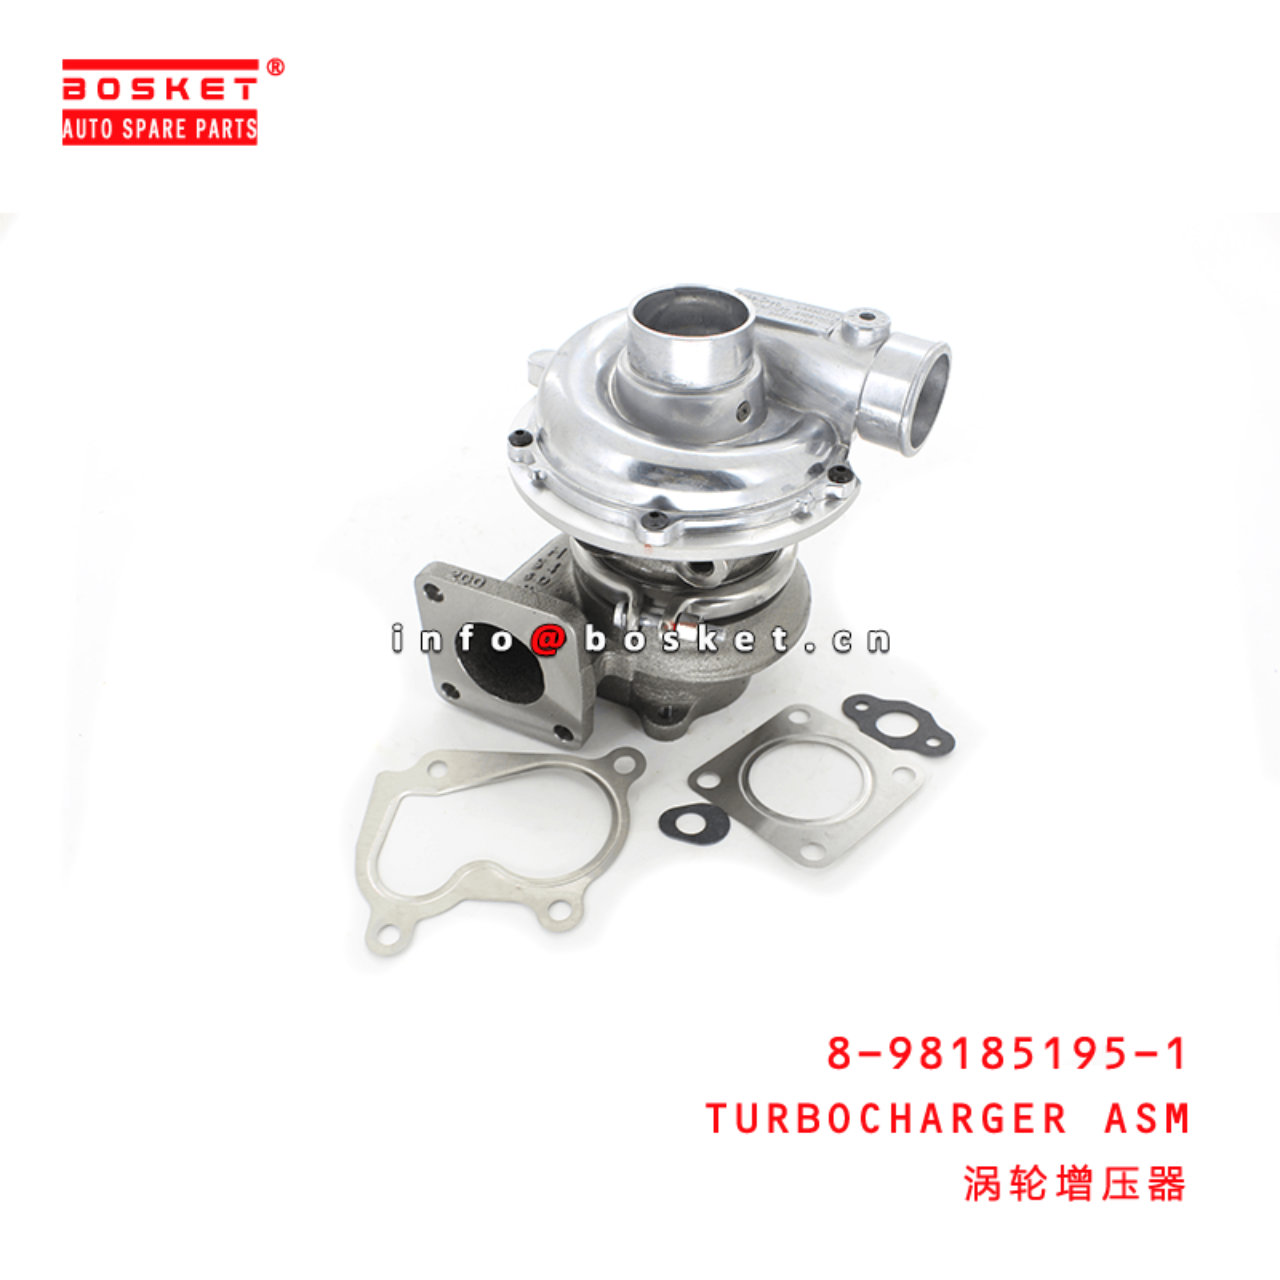 8-98185195-1 Turbocharger Assembly Suitable for ISUZU XD 4JJ1-XYSS-02 8981851951